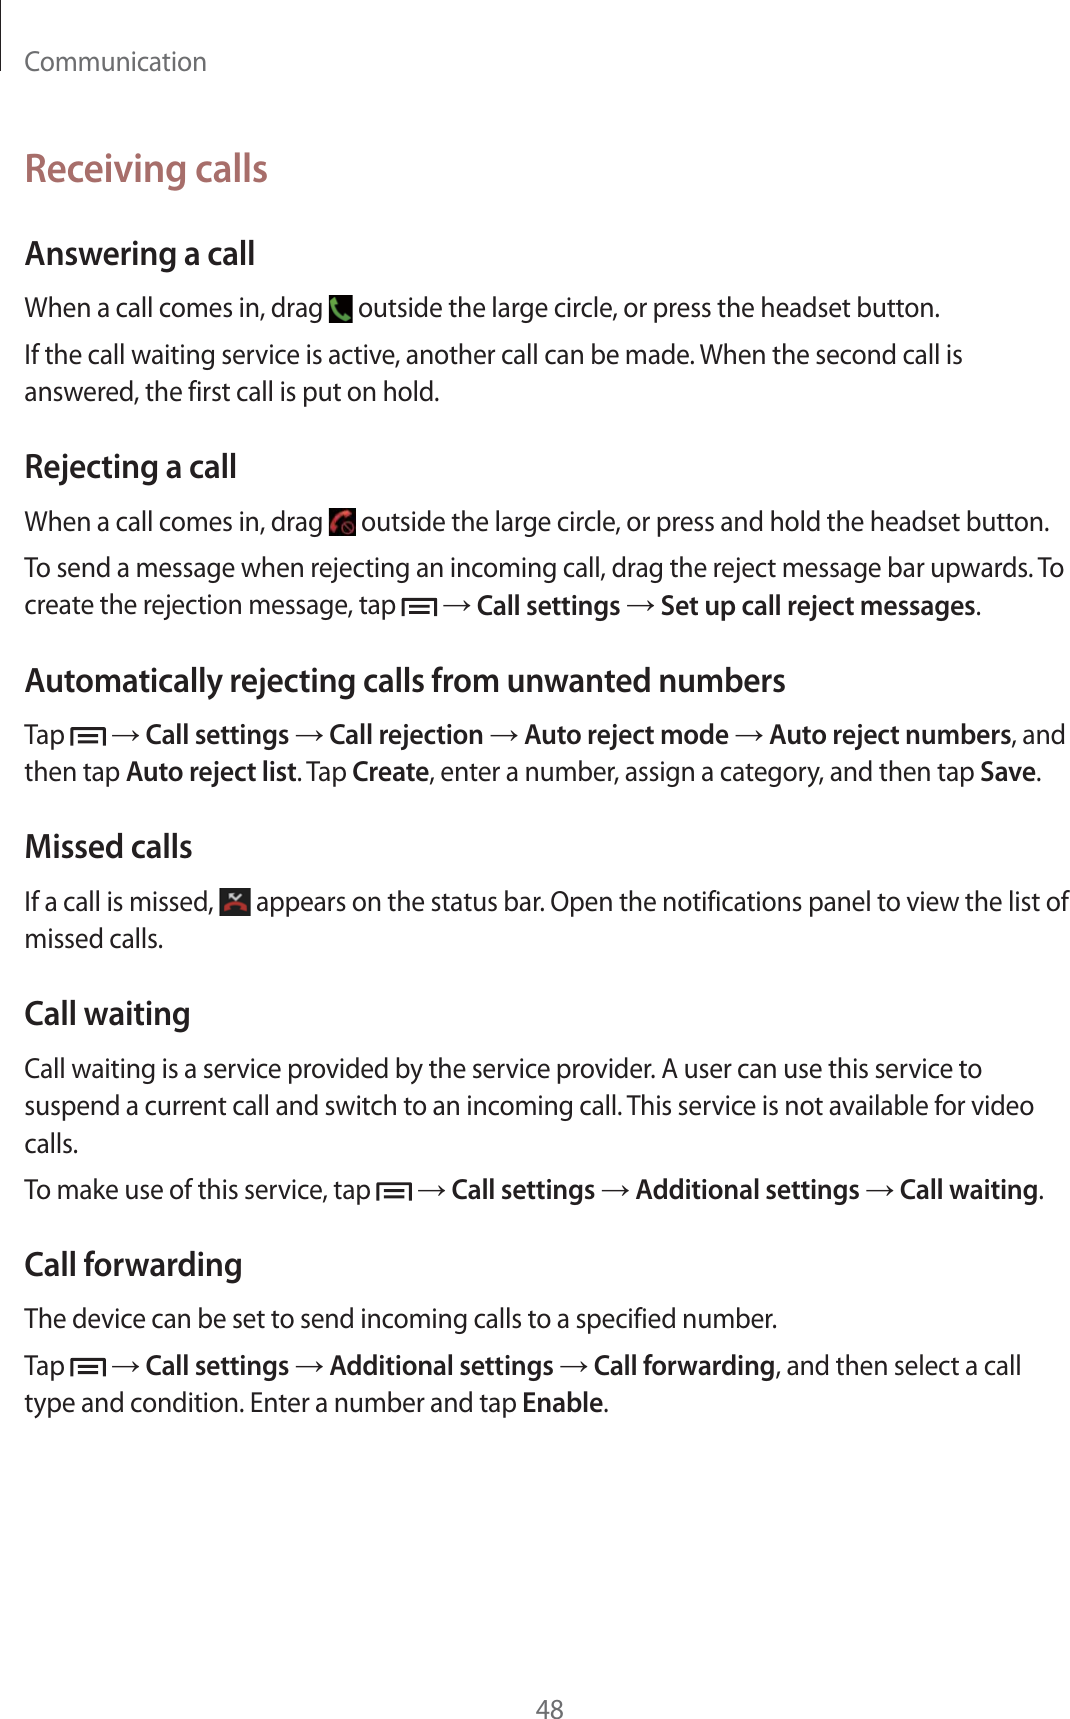 Communication48Receiving callsAnswering a callWhen a call comes in, drag   outside the large circle, or press the headset button.If the call waiting service is active, another call can be made. When the second call is answered, the first call is put on hold.Rejecting a callWhen a call comes in, drag   outside the large circle, or press and hold the headset button.To send a message when rejecting an incoming call, drag the reject message bar upwards. To create the rejection message, tap    Call settings  Set up call reject messages.Automatically rejecting calls from unwanted numbersTap    Call settings  Call rejection  Auto reject mode  Auto reject numbers, and then tap Auto reject list. Tap Create, enter a number, assign a category, and then tap Save.Missed callsIf a call is missed,   appears on the status bar. Open the notifications panel to view the list of missed calls.Call waitingCall waiting is a service provided by the service provider. A user can use this service to suspend a current call and switch to an incoming call. This service is not available for video calls.To make use of this service, tap    Call settings  Additional settings  Call waiting.Call forwardingThe device can be set to send incoming calls to a specified number.Tap    Call settings  Additional settings  Call forwarding, and then select a call type and condition. Enter a number and tap Enable.